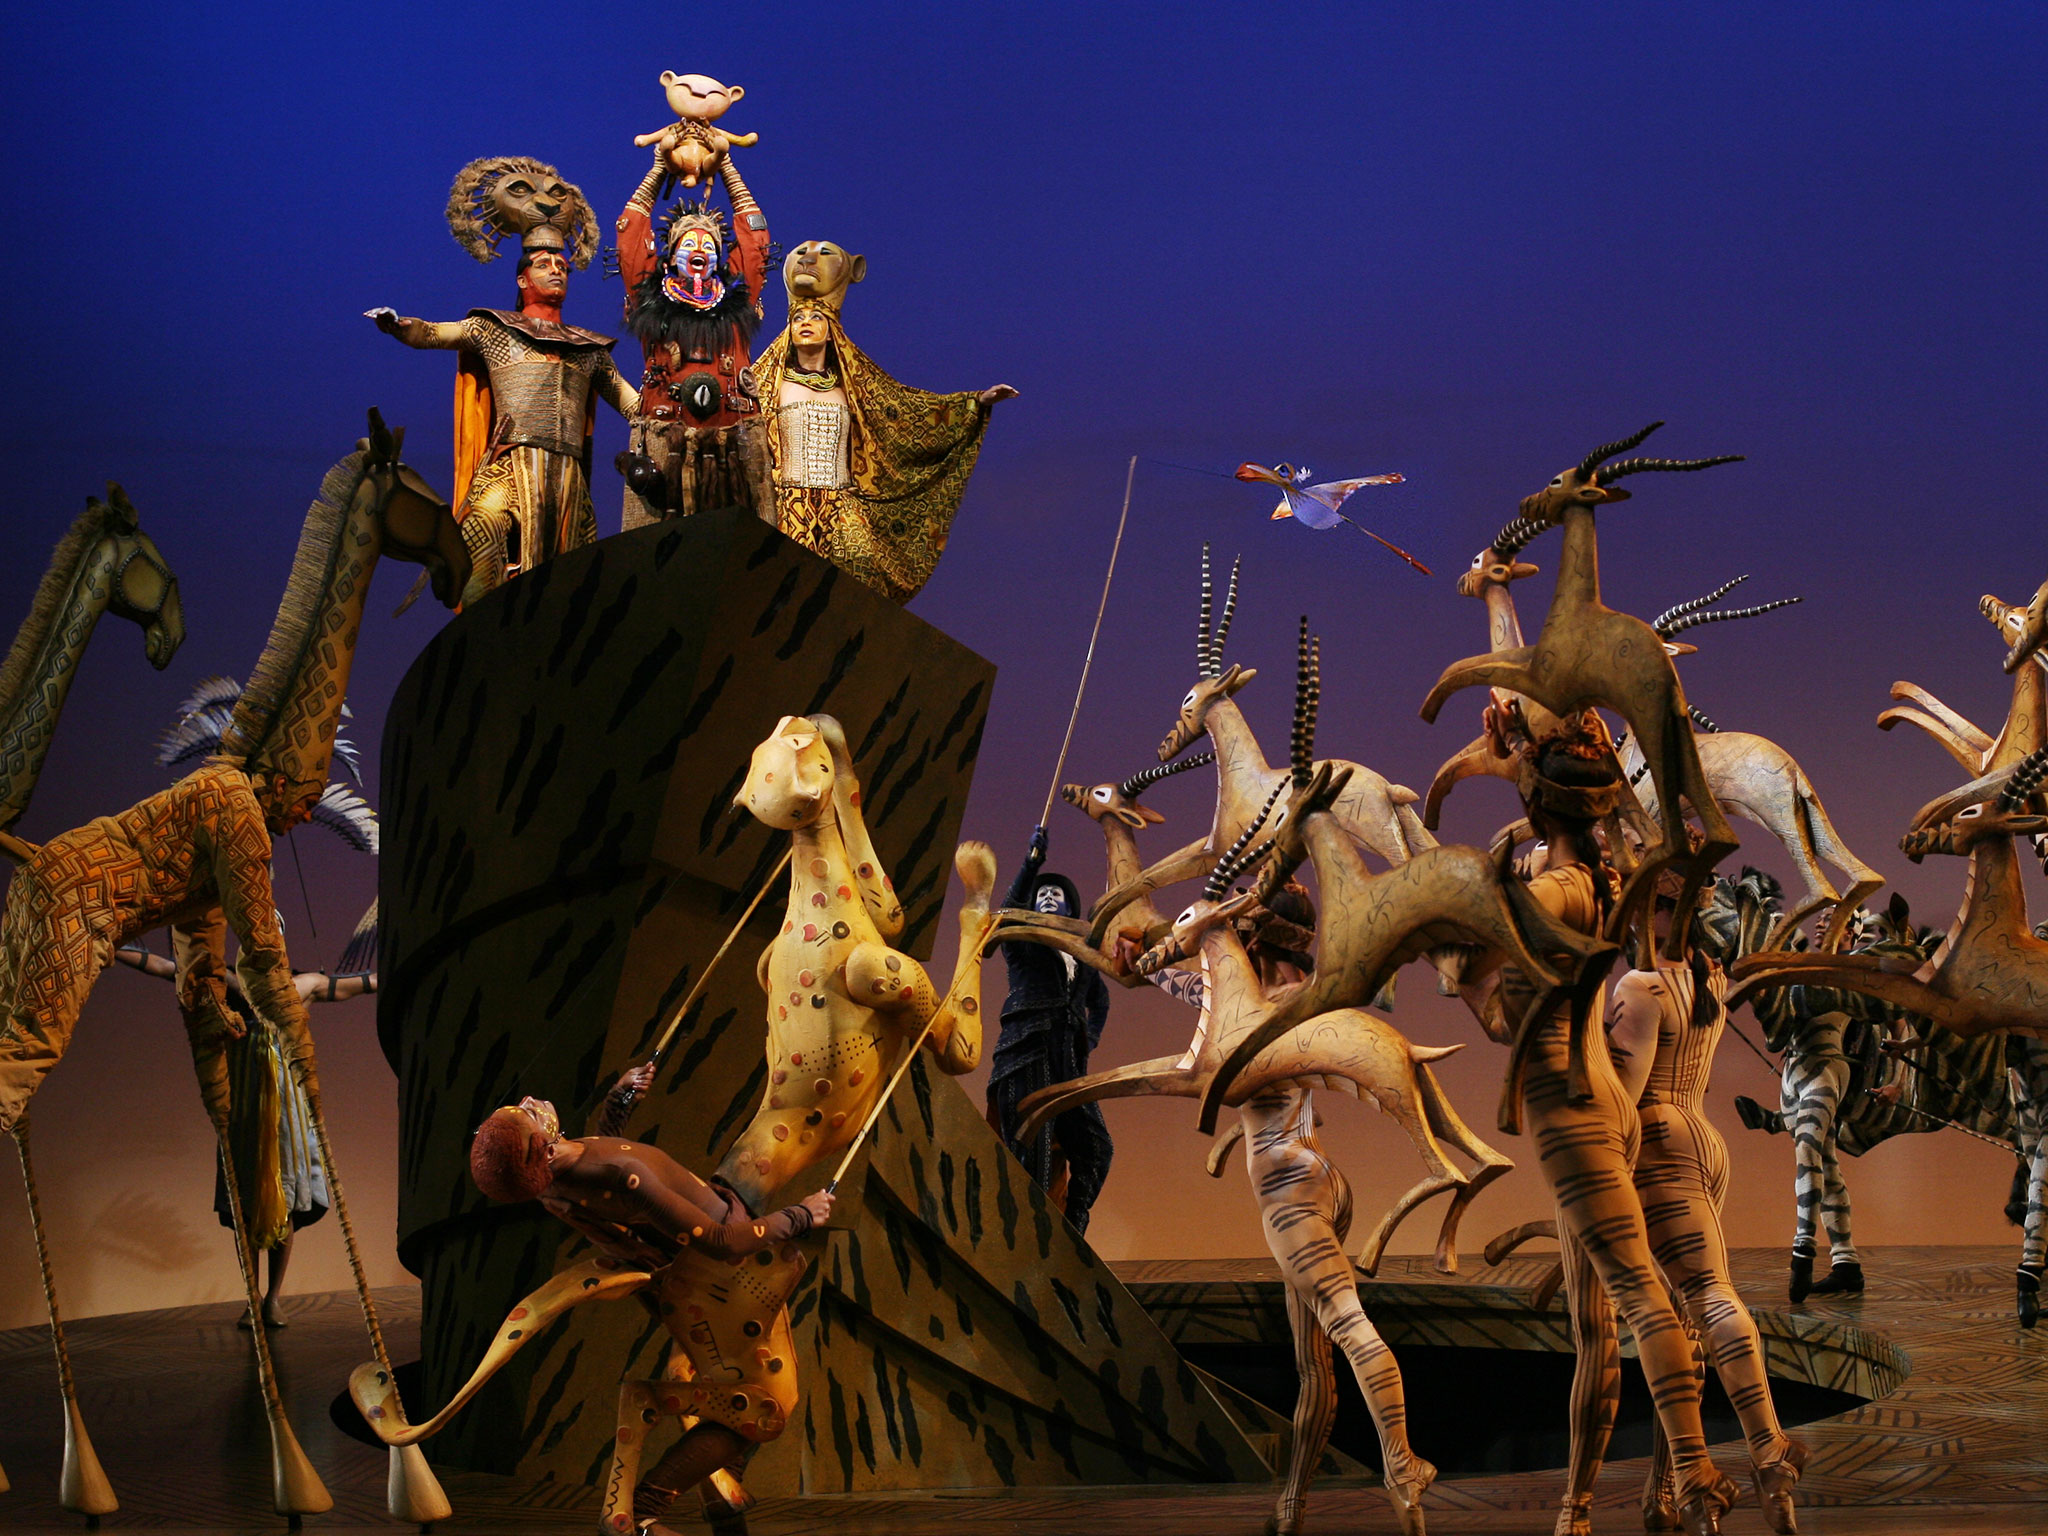 download the lion king musical tour 2022